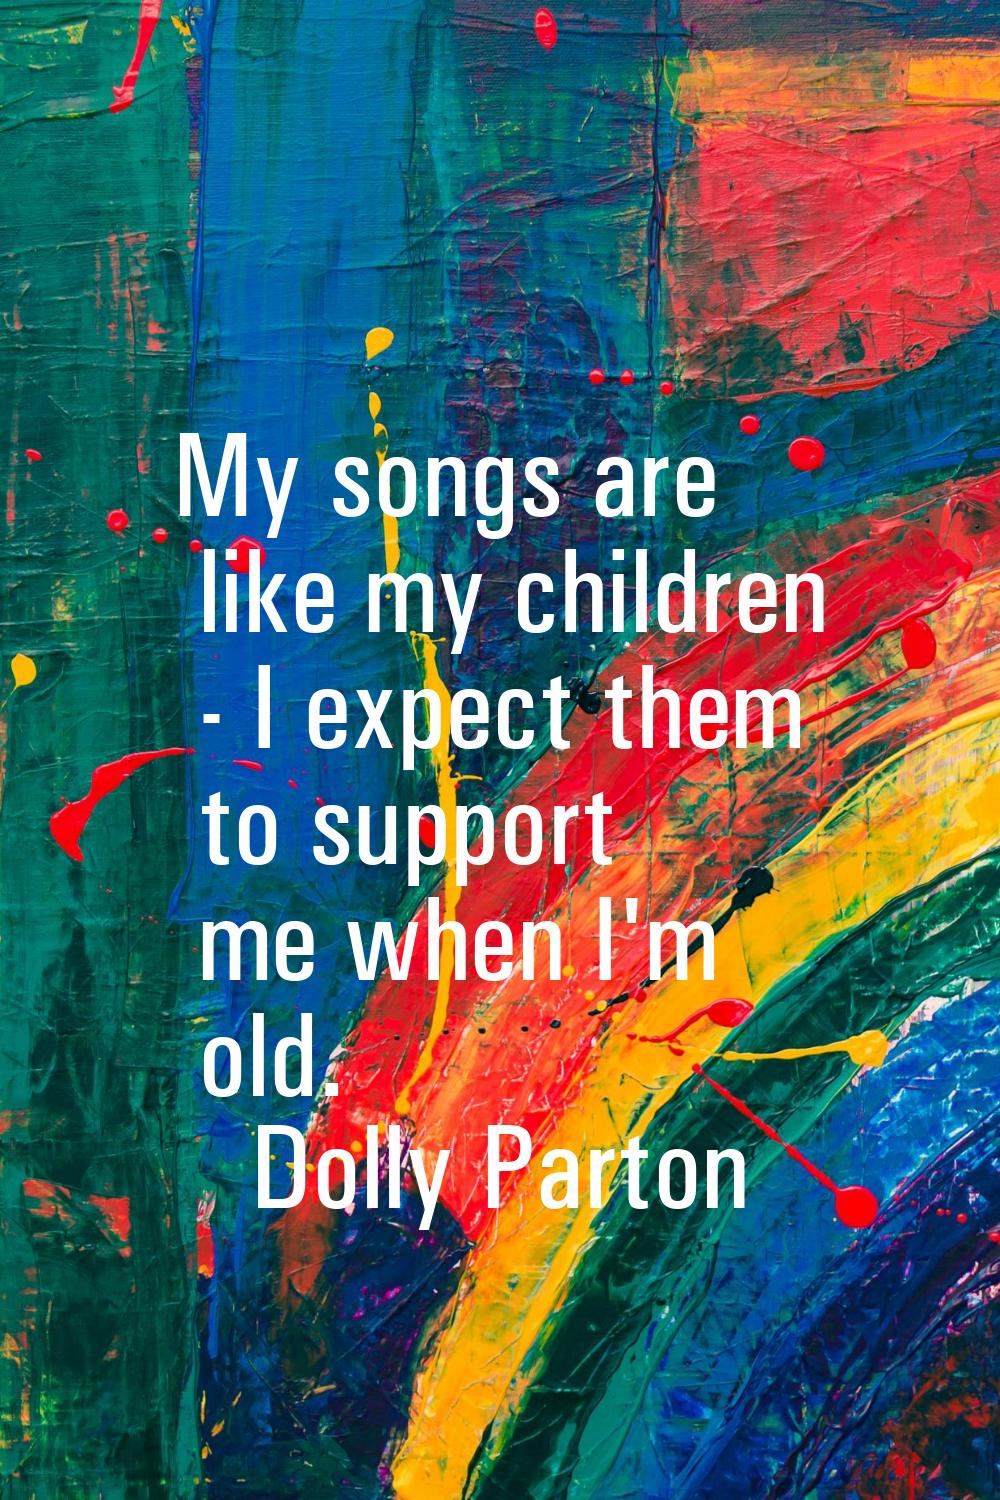 My songs are like my children - I expect them to support me when I'm old.